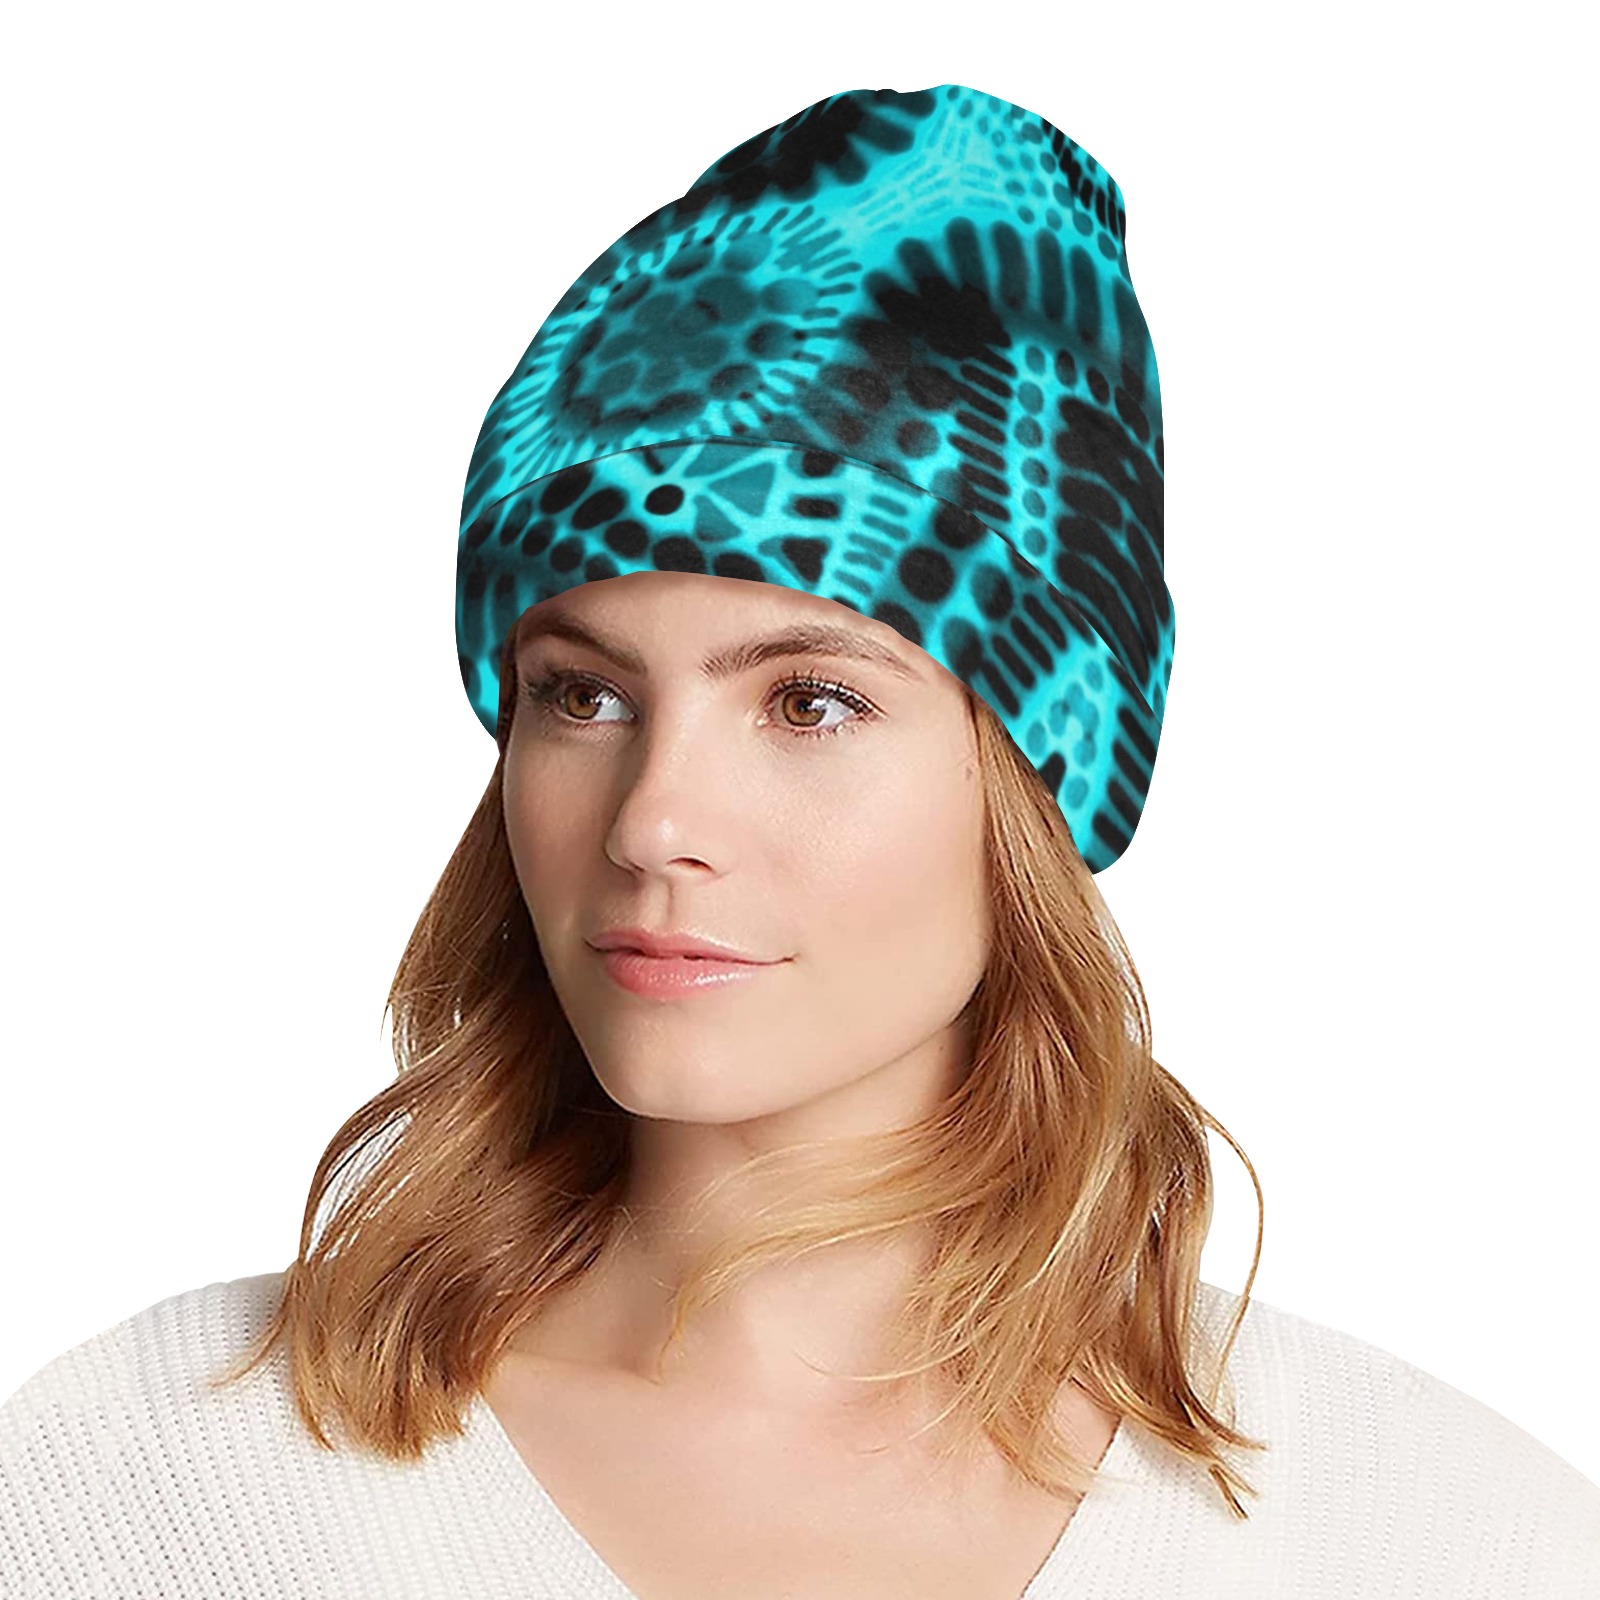 geometry 6 All Over Print Beanie for Adults